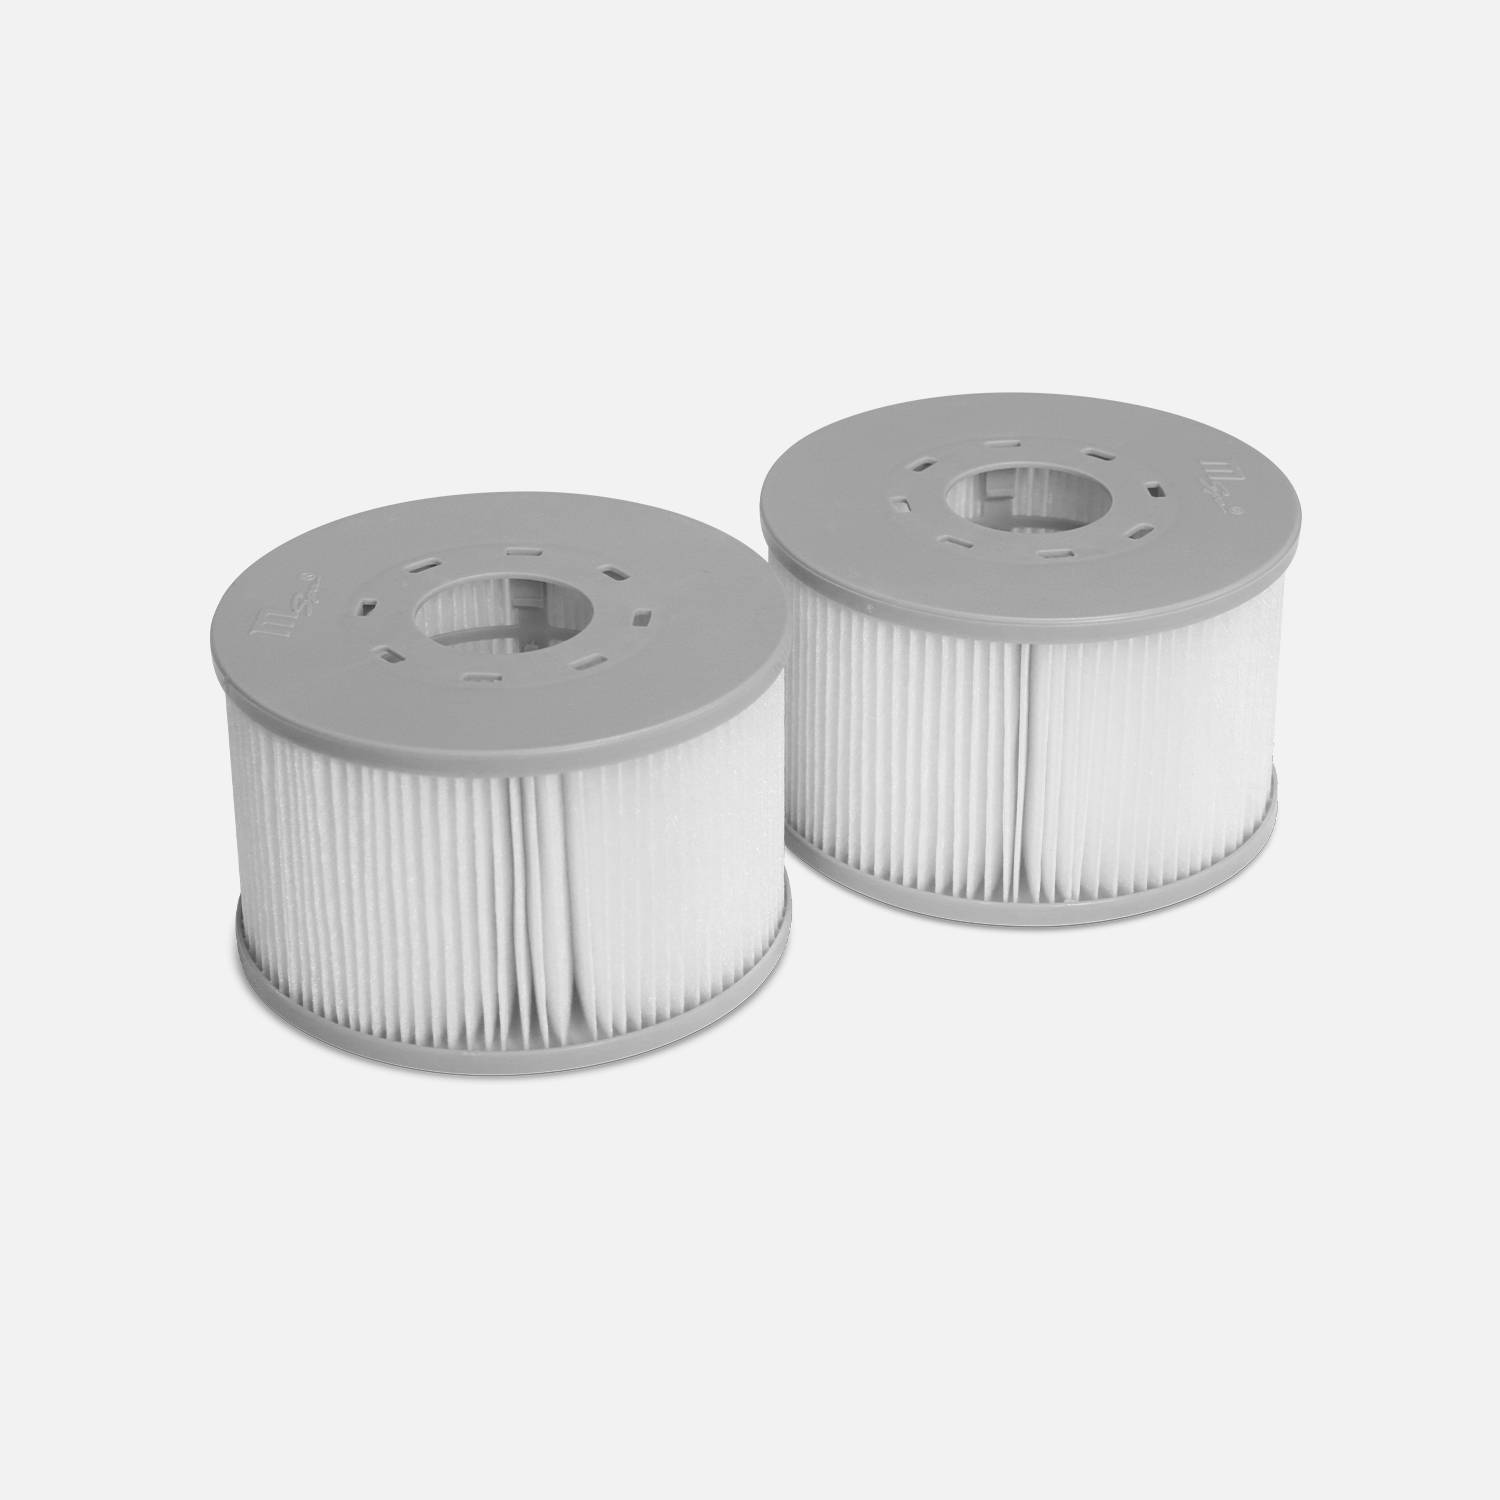 Pack of 2 replacement filters for hot tub MSPA V2 - Fjord 4 & 6 | sweeek